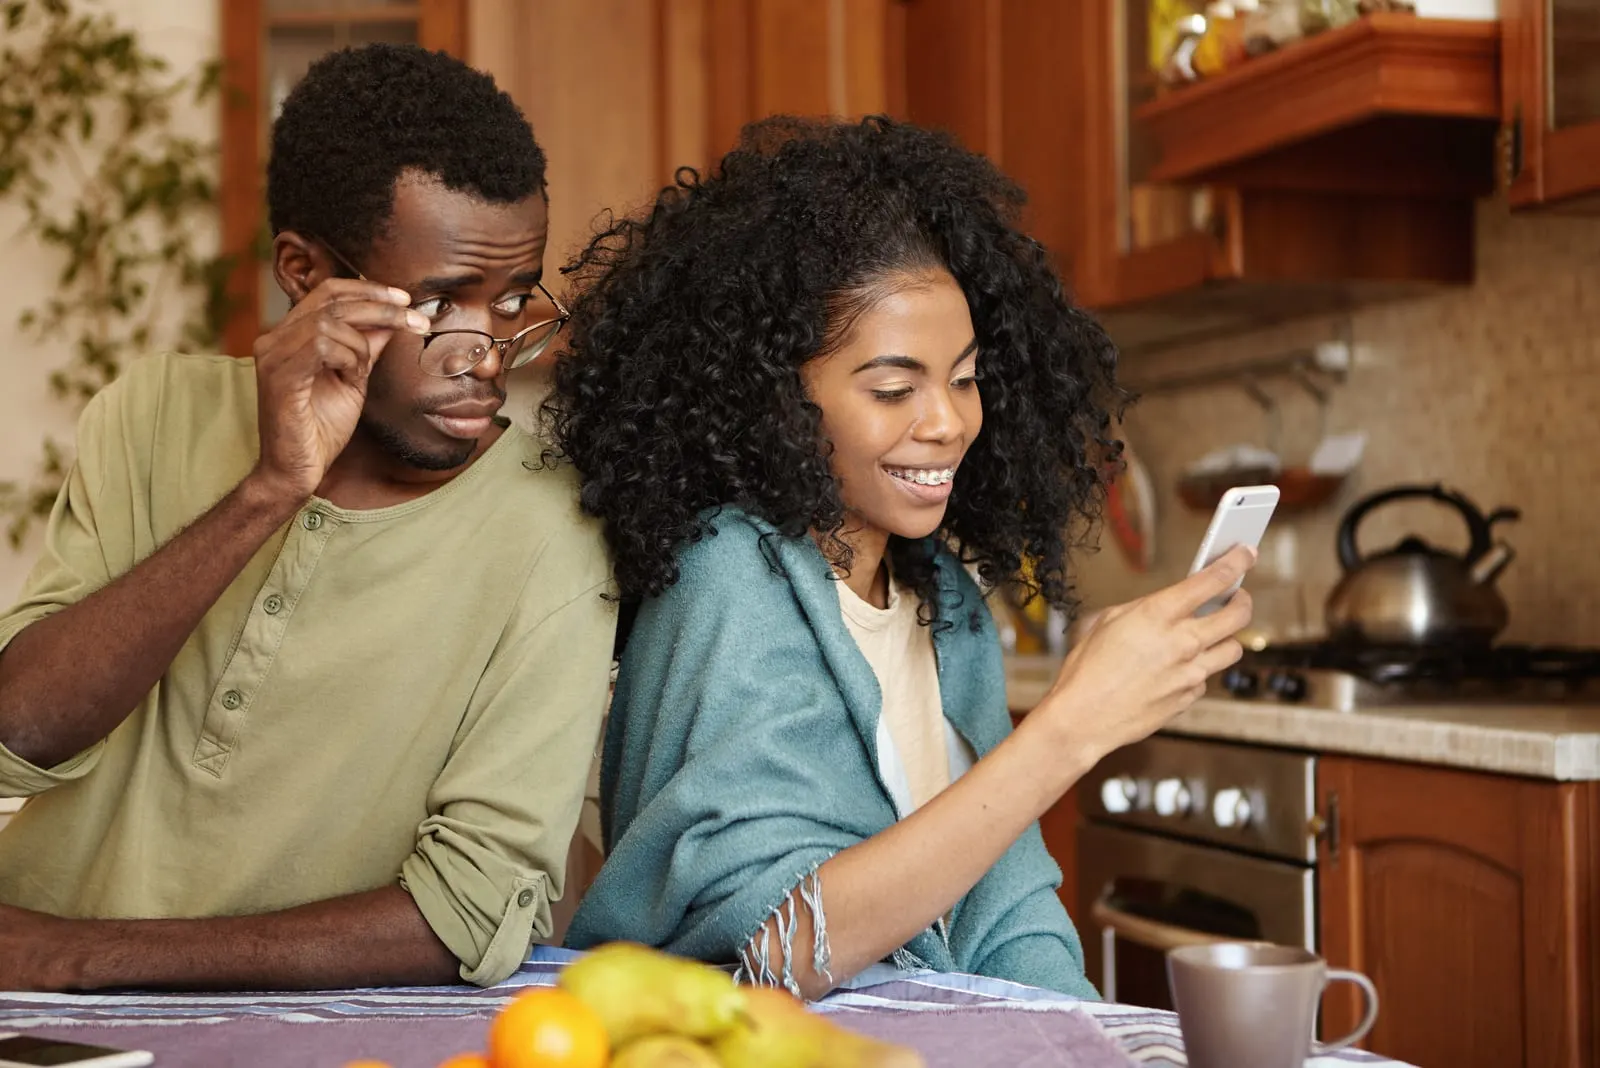 a jealous black man peeks into the contents of his wife's smartphone